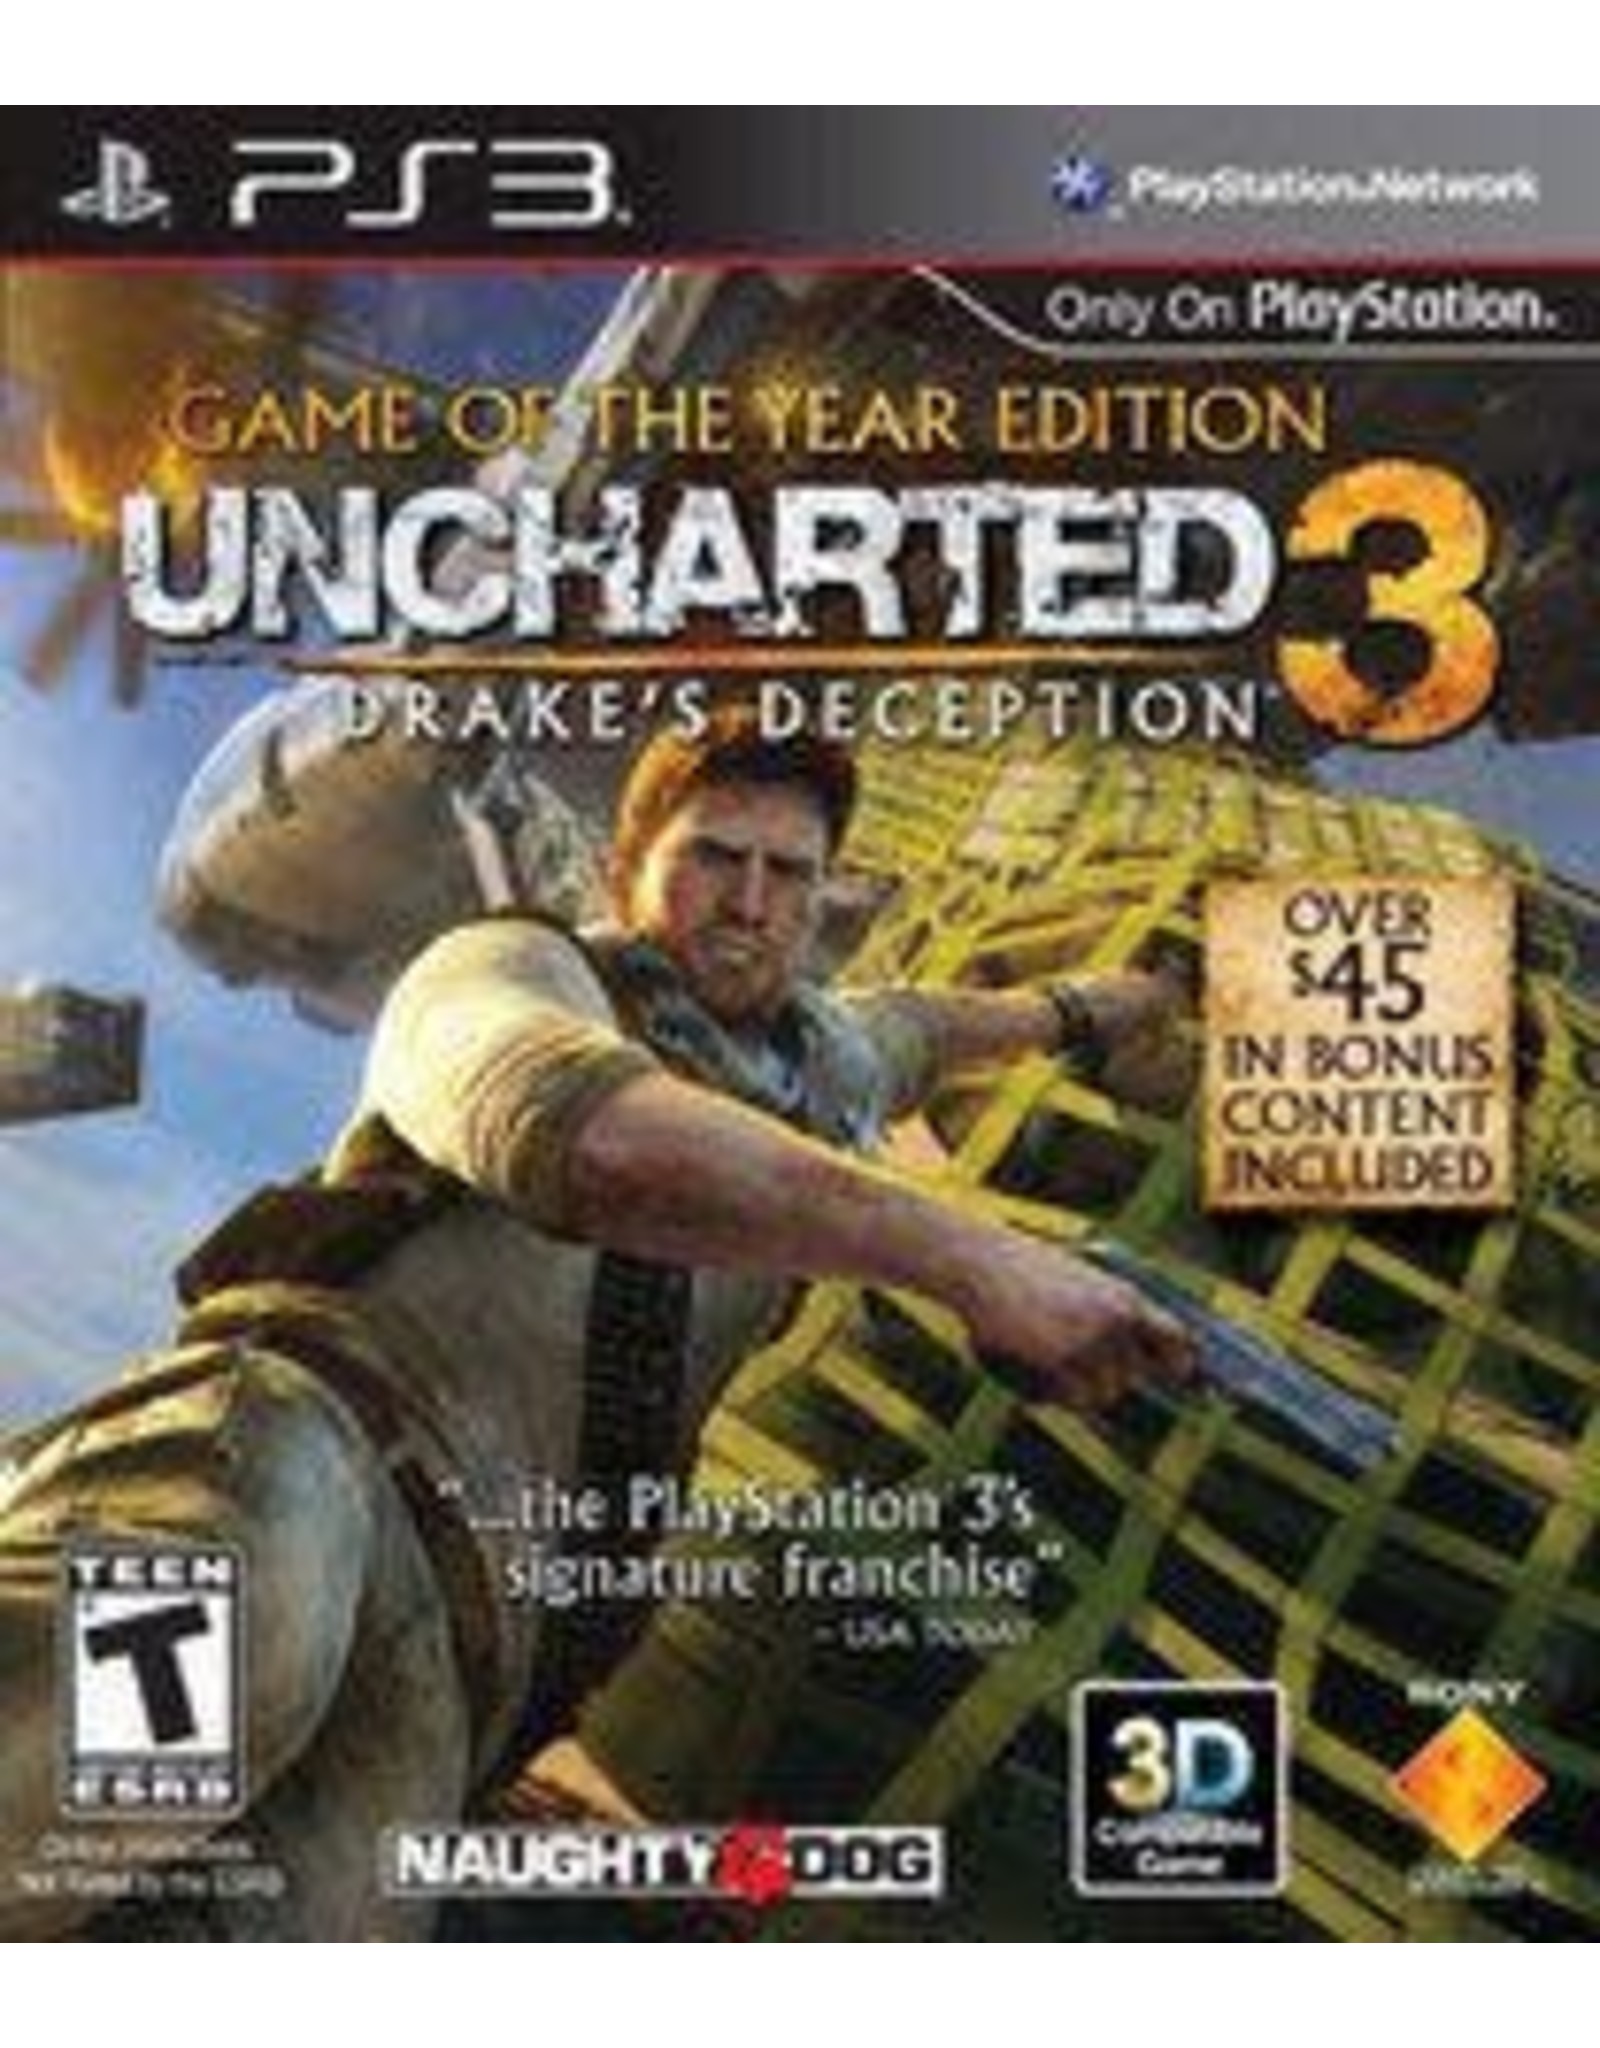 Playstation 3 Uncharted 3 Drake's Deception Game of the Year Edition (CiB)